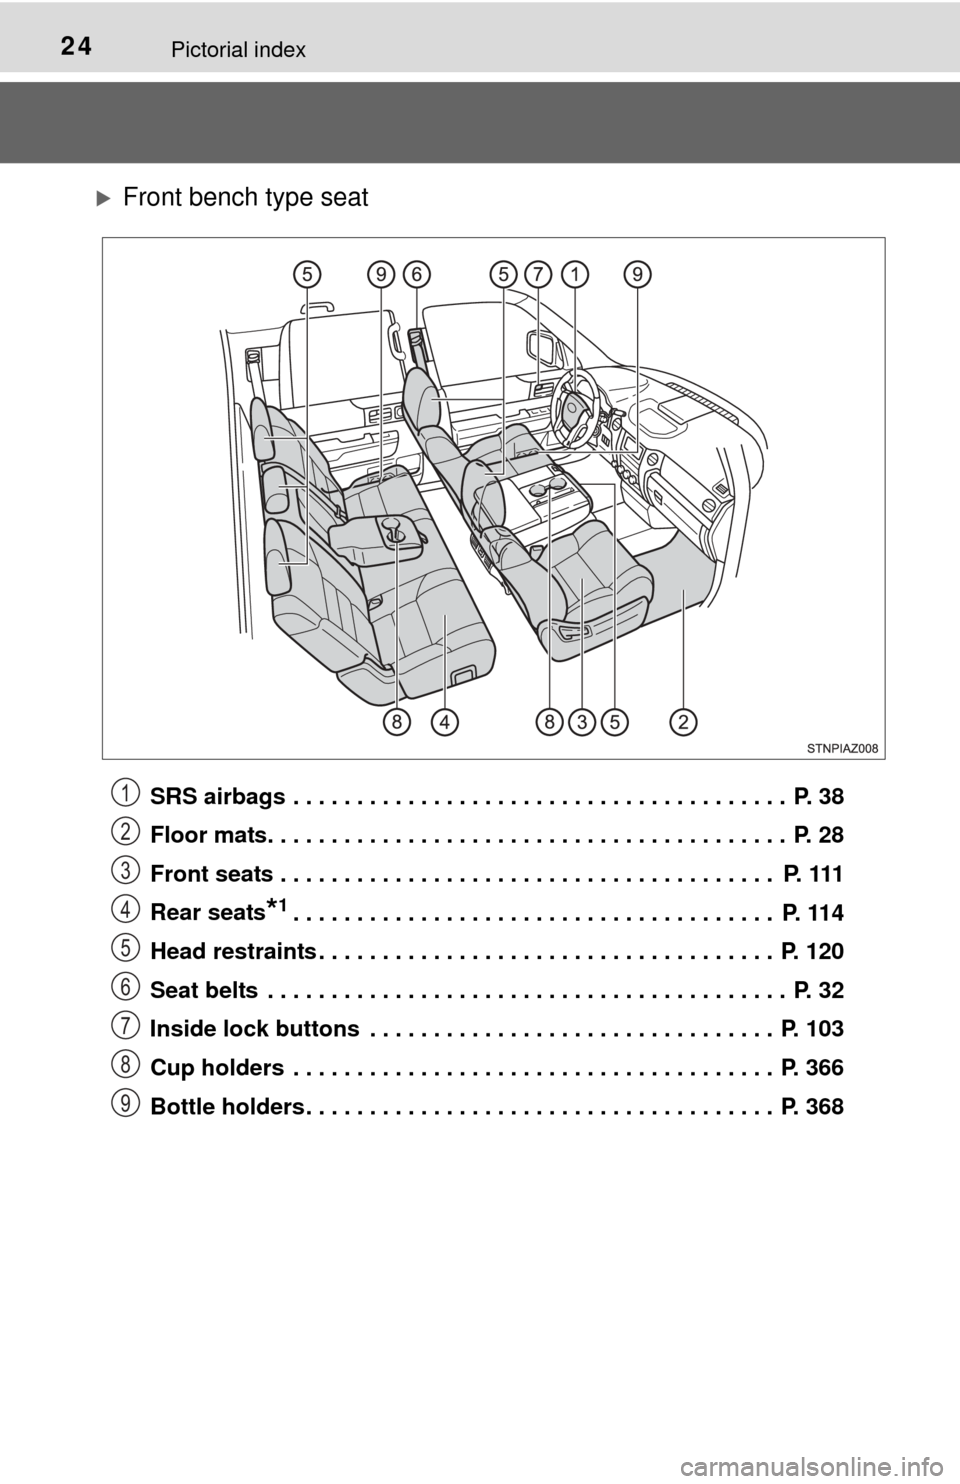 TOYOTA TUNDRA 2015 2.G Owners Manual 24Pictorial index
Front bench type seat
SRS airbags  . . . . . . . . . . . . . . . . . . . . . . . . . . . . . . . . . . . . . . .  P. 38
Floor mats. . . . . . . . . . . . . . . . . . . . . . . . .